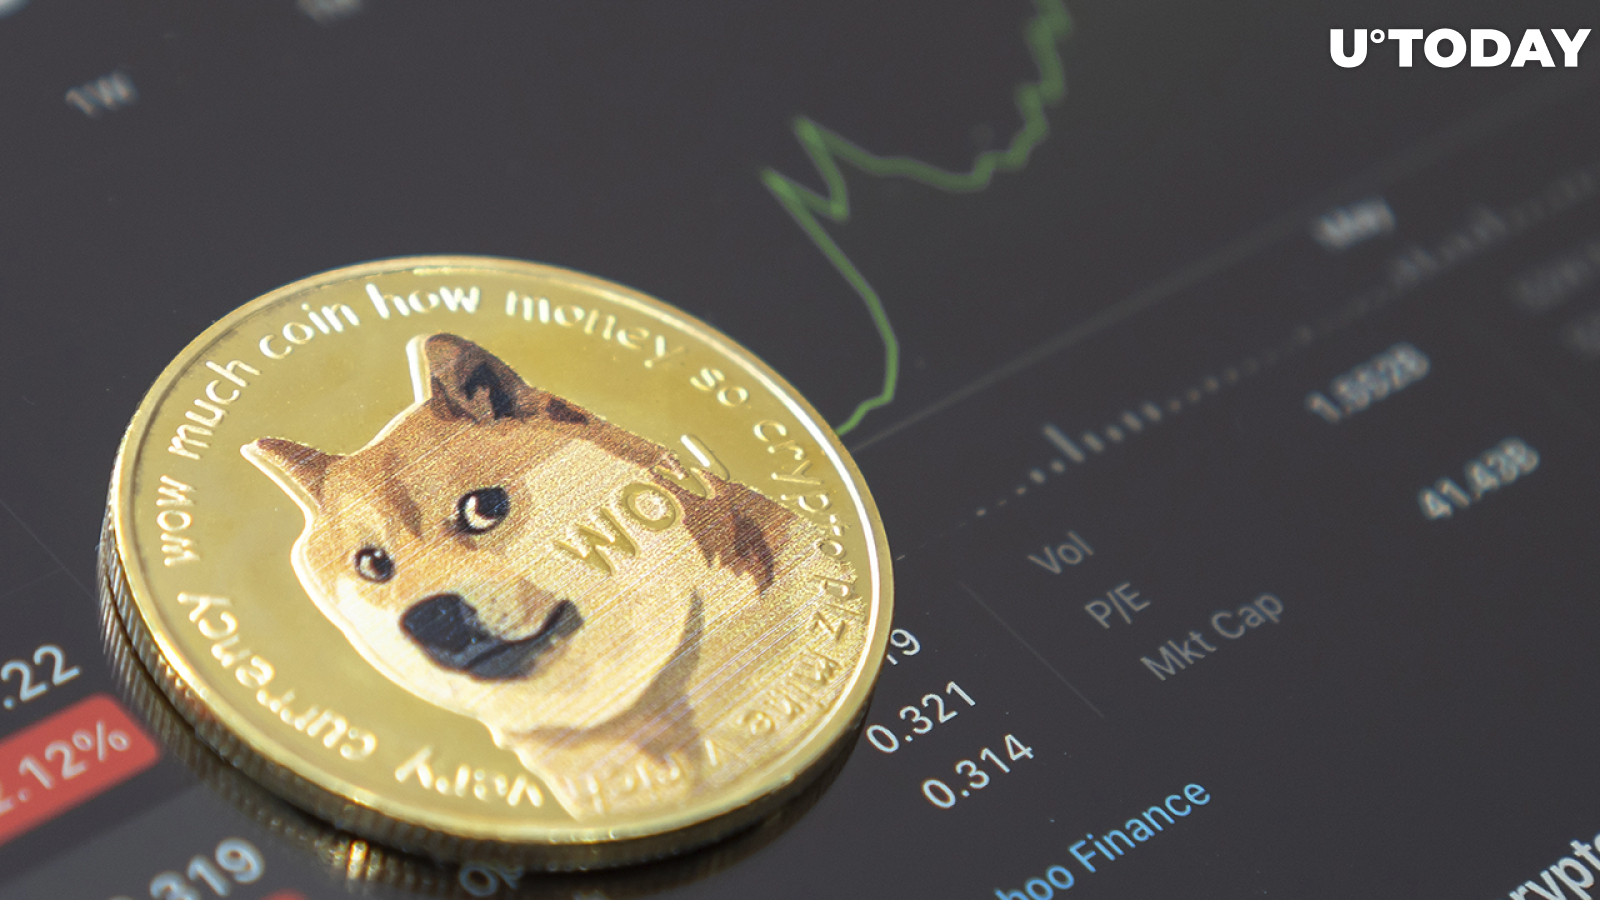 Dogecoin Founder Says He Earned Next to Nothing on DOGE But New Meme Coins Made for Profit